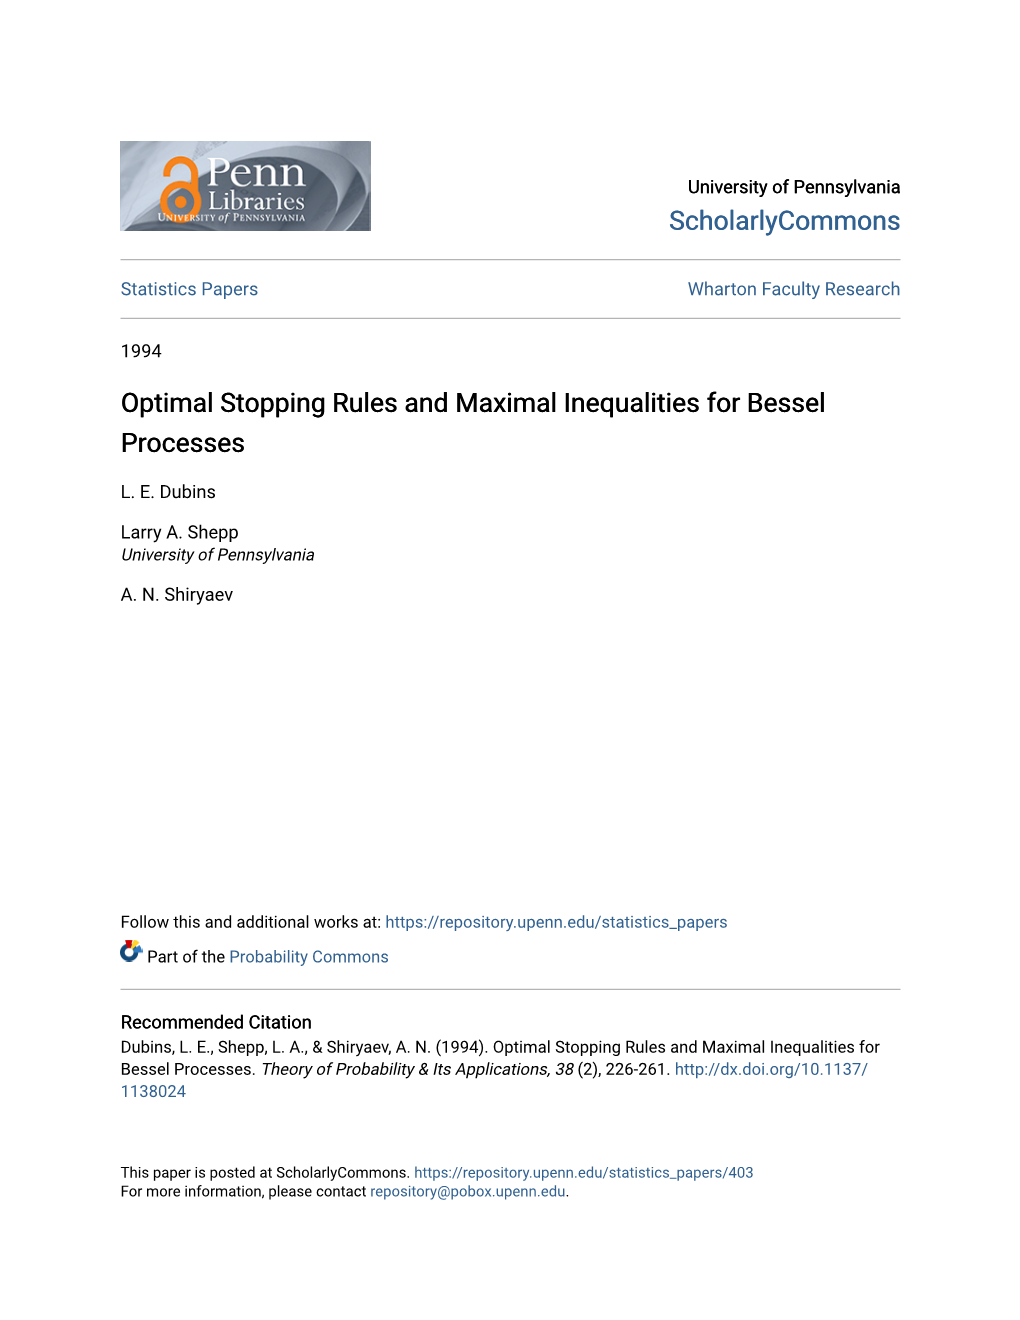 Optimal Stopping Rules and Maximal Inequalities for Bessel Processes